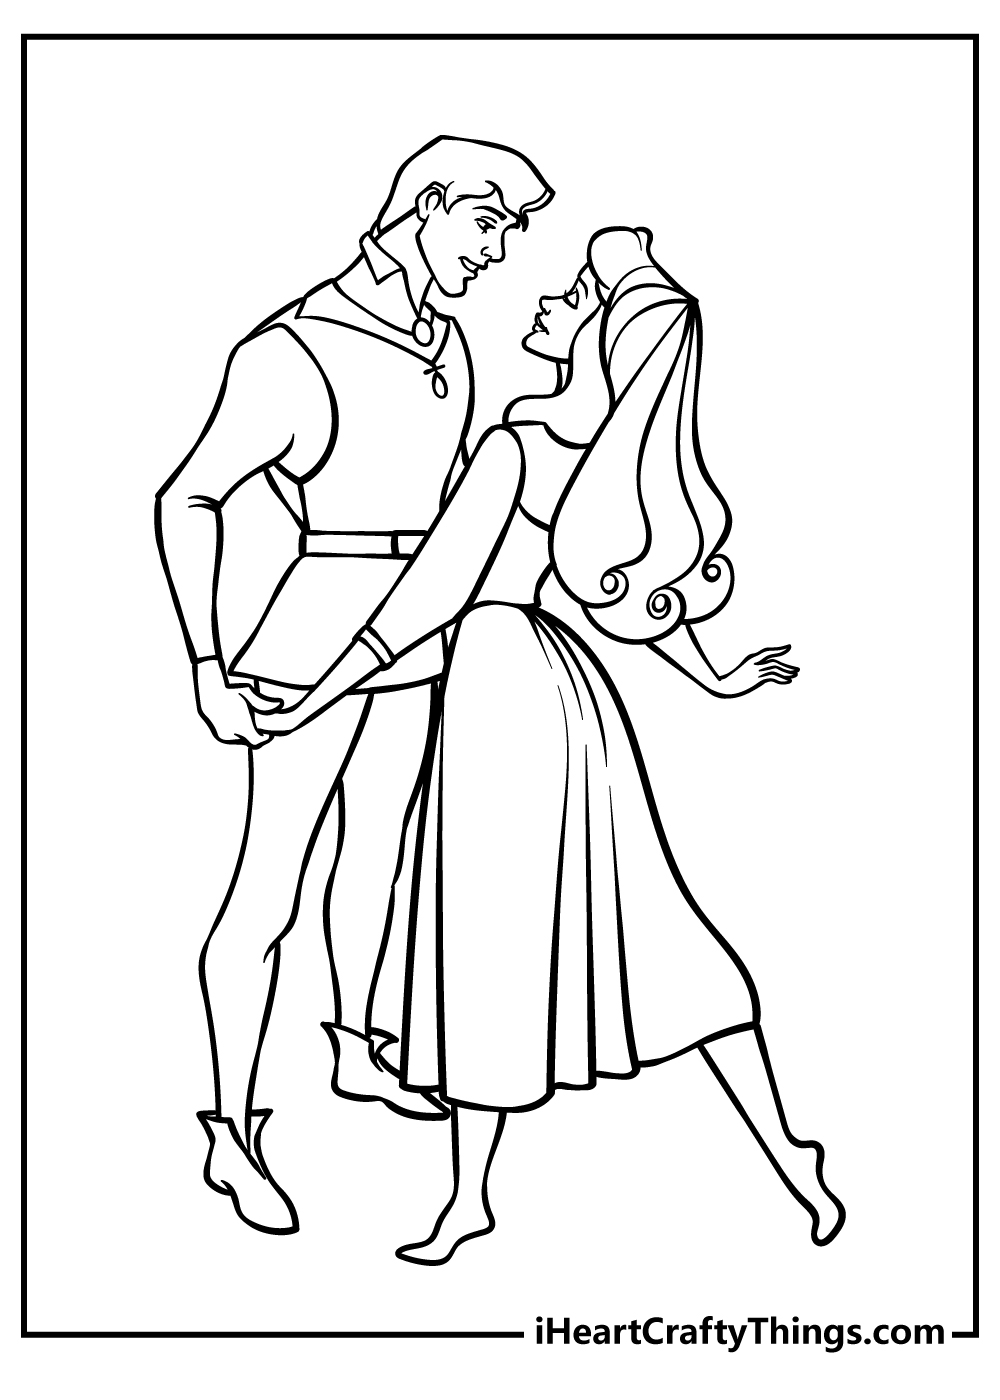 Sleeping Beauty Coloring Book for adults free download